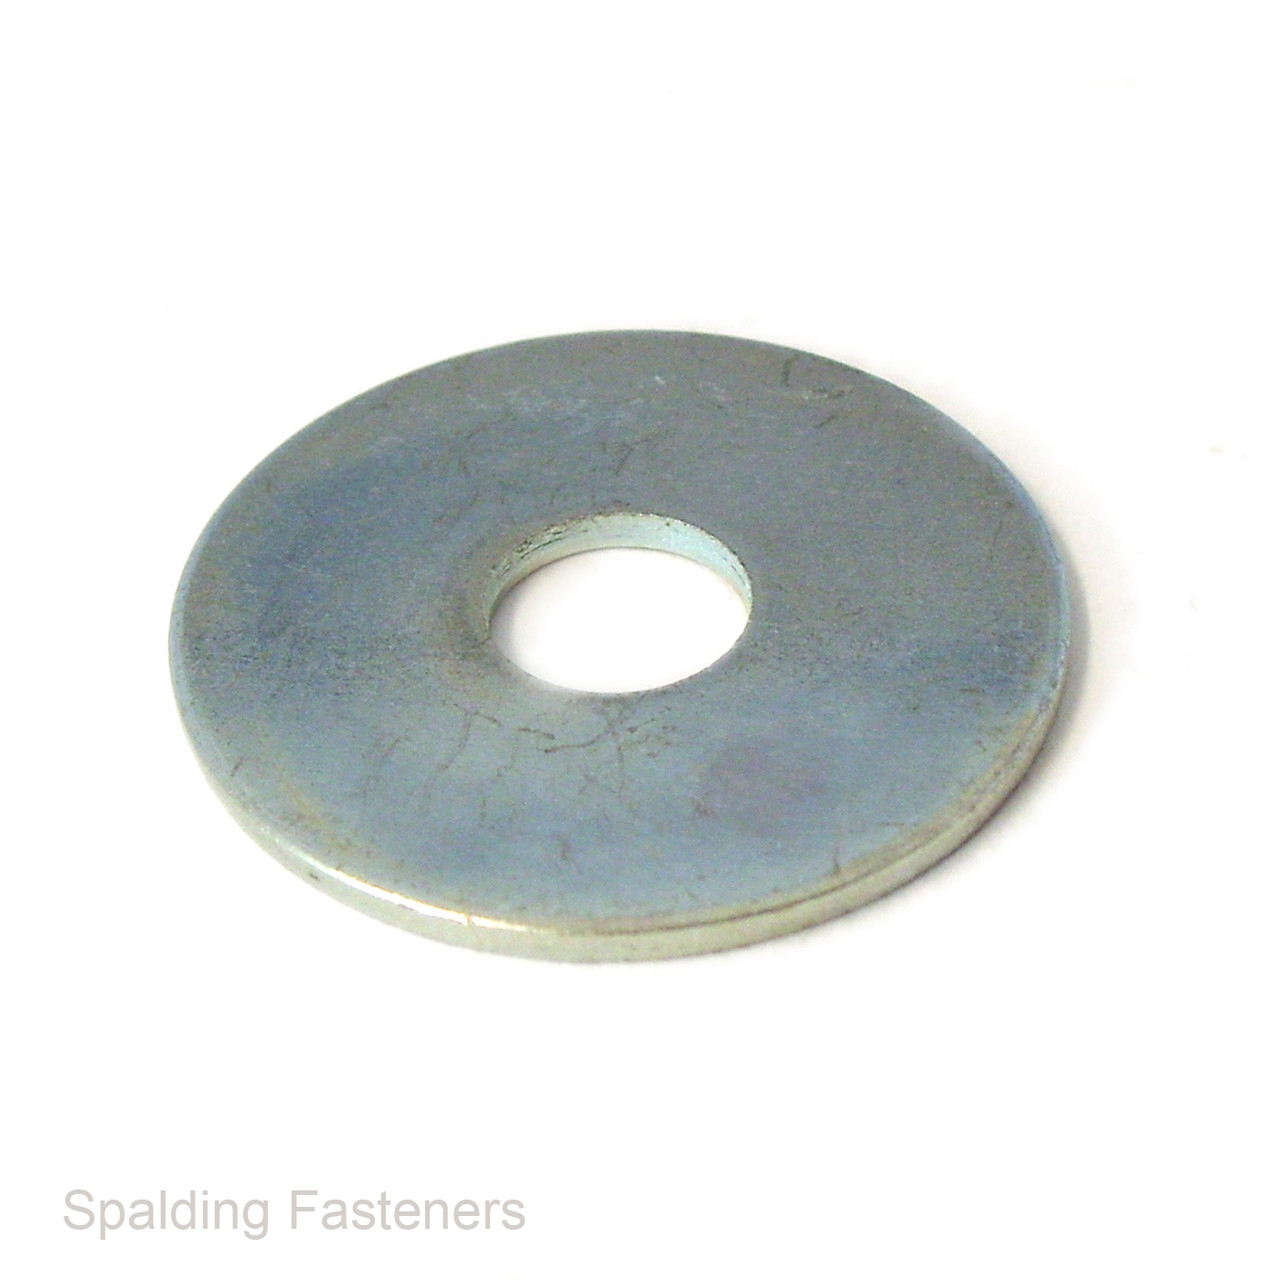 Metric Zinc Plated Steel Flat Penny Repair Washers - M5 to M12